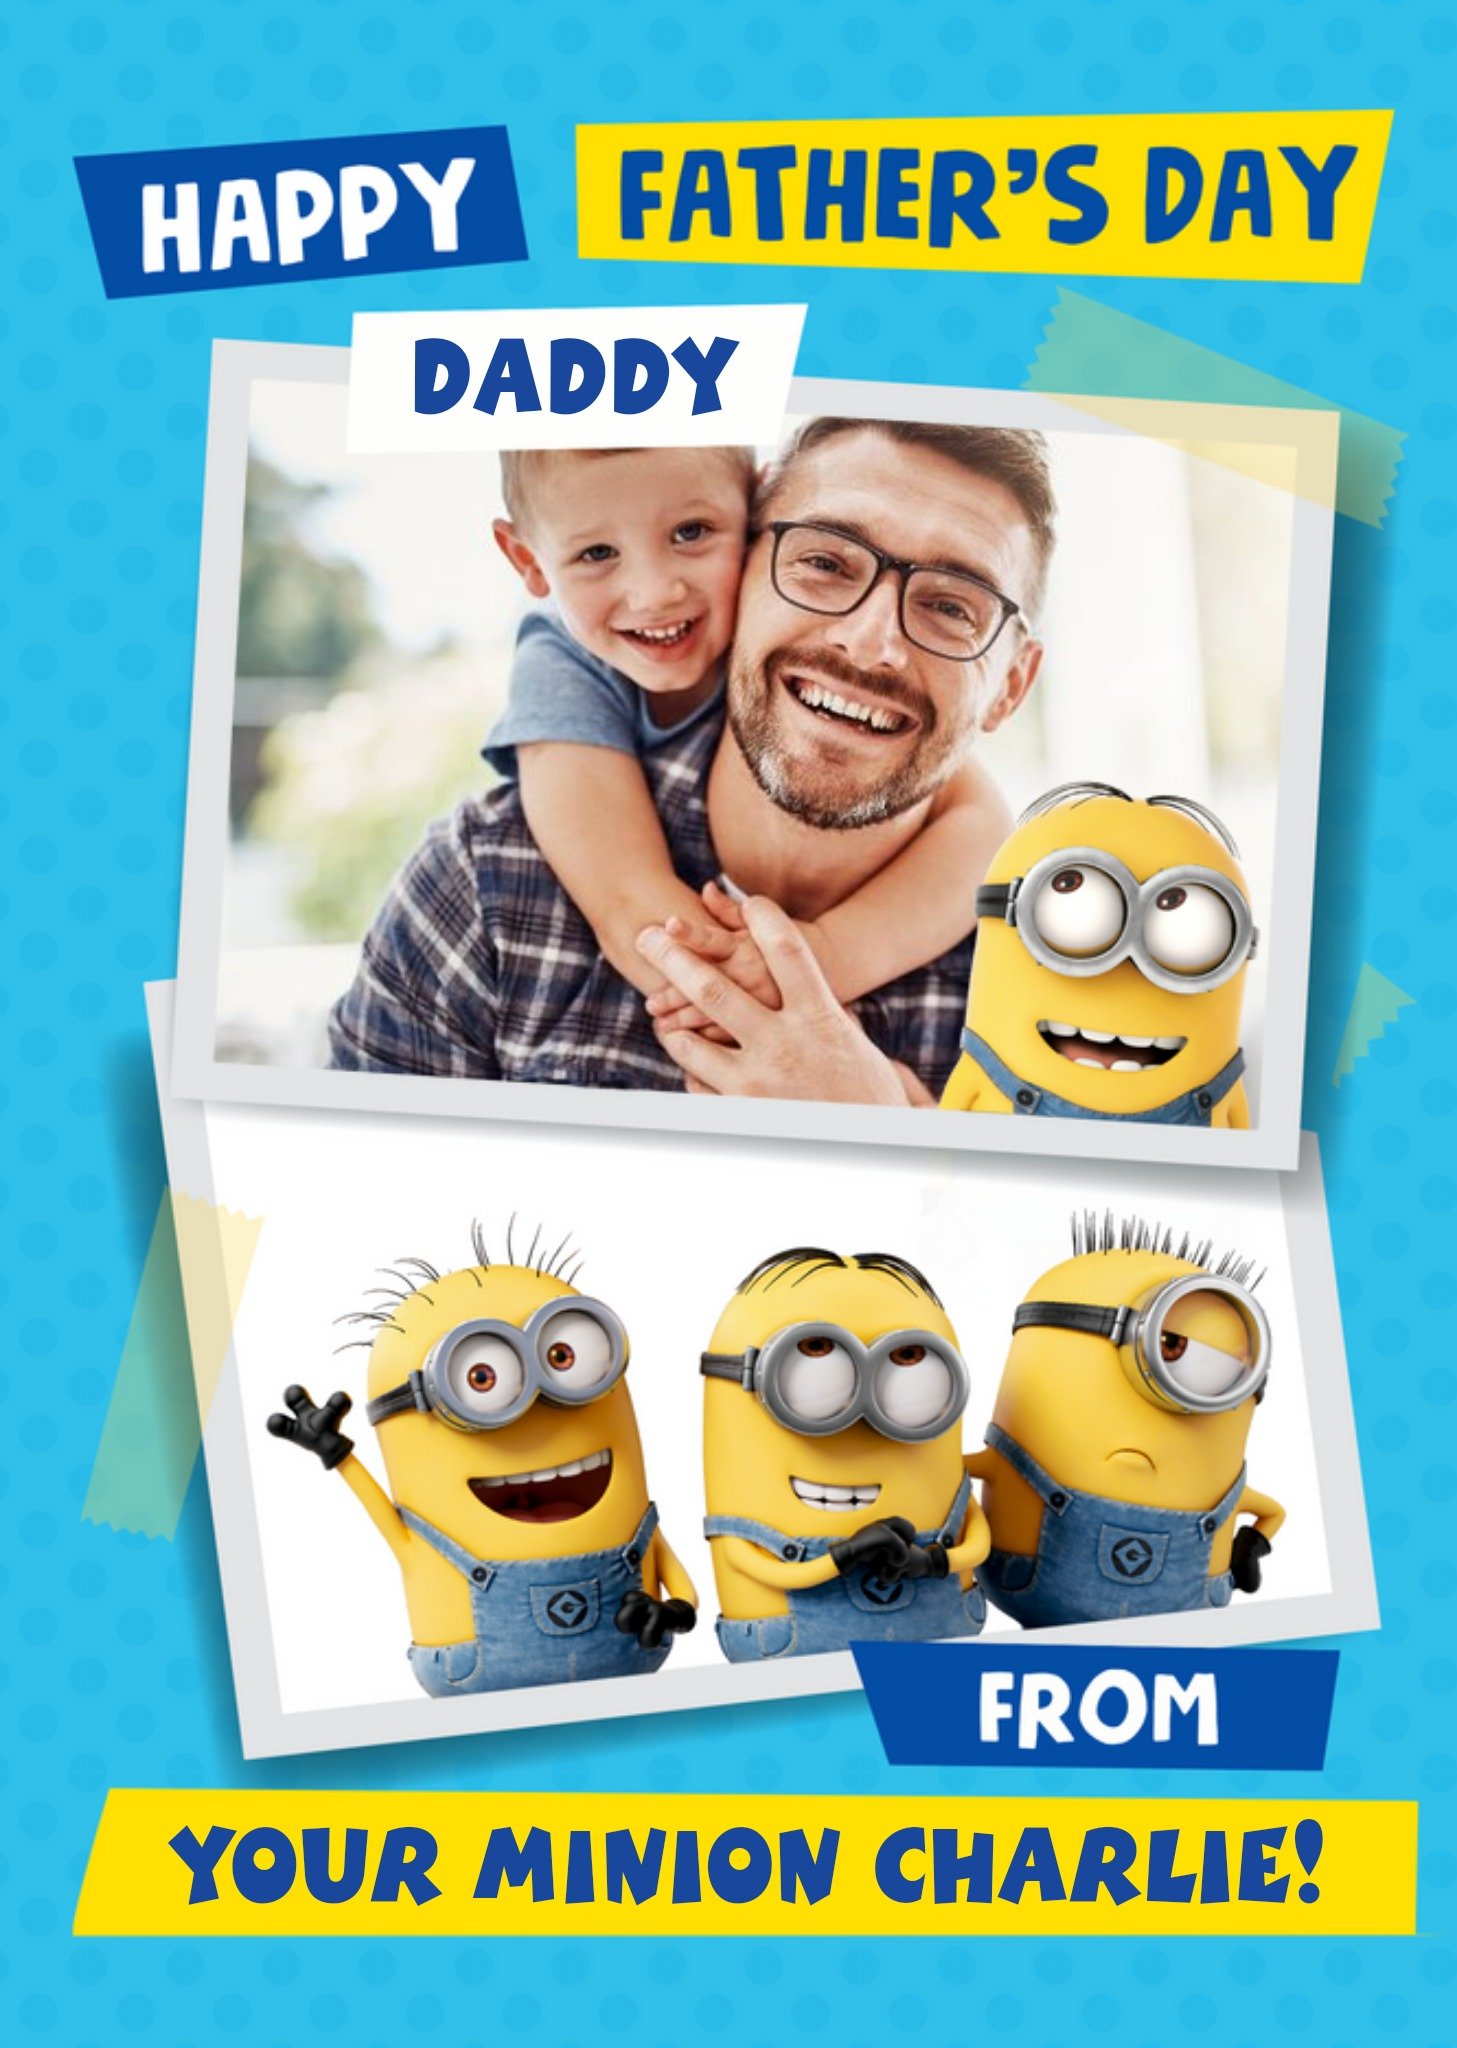 Despicable Me The Minions Happy Father's Day Daddy Photo Card, Large